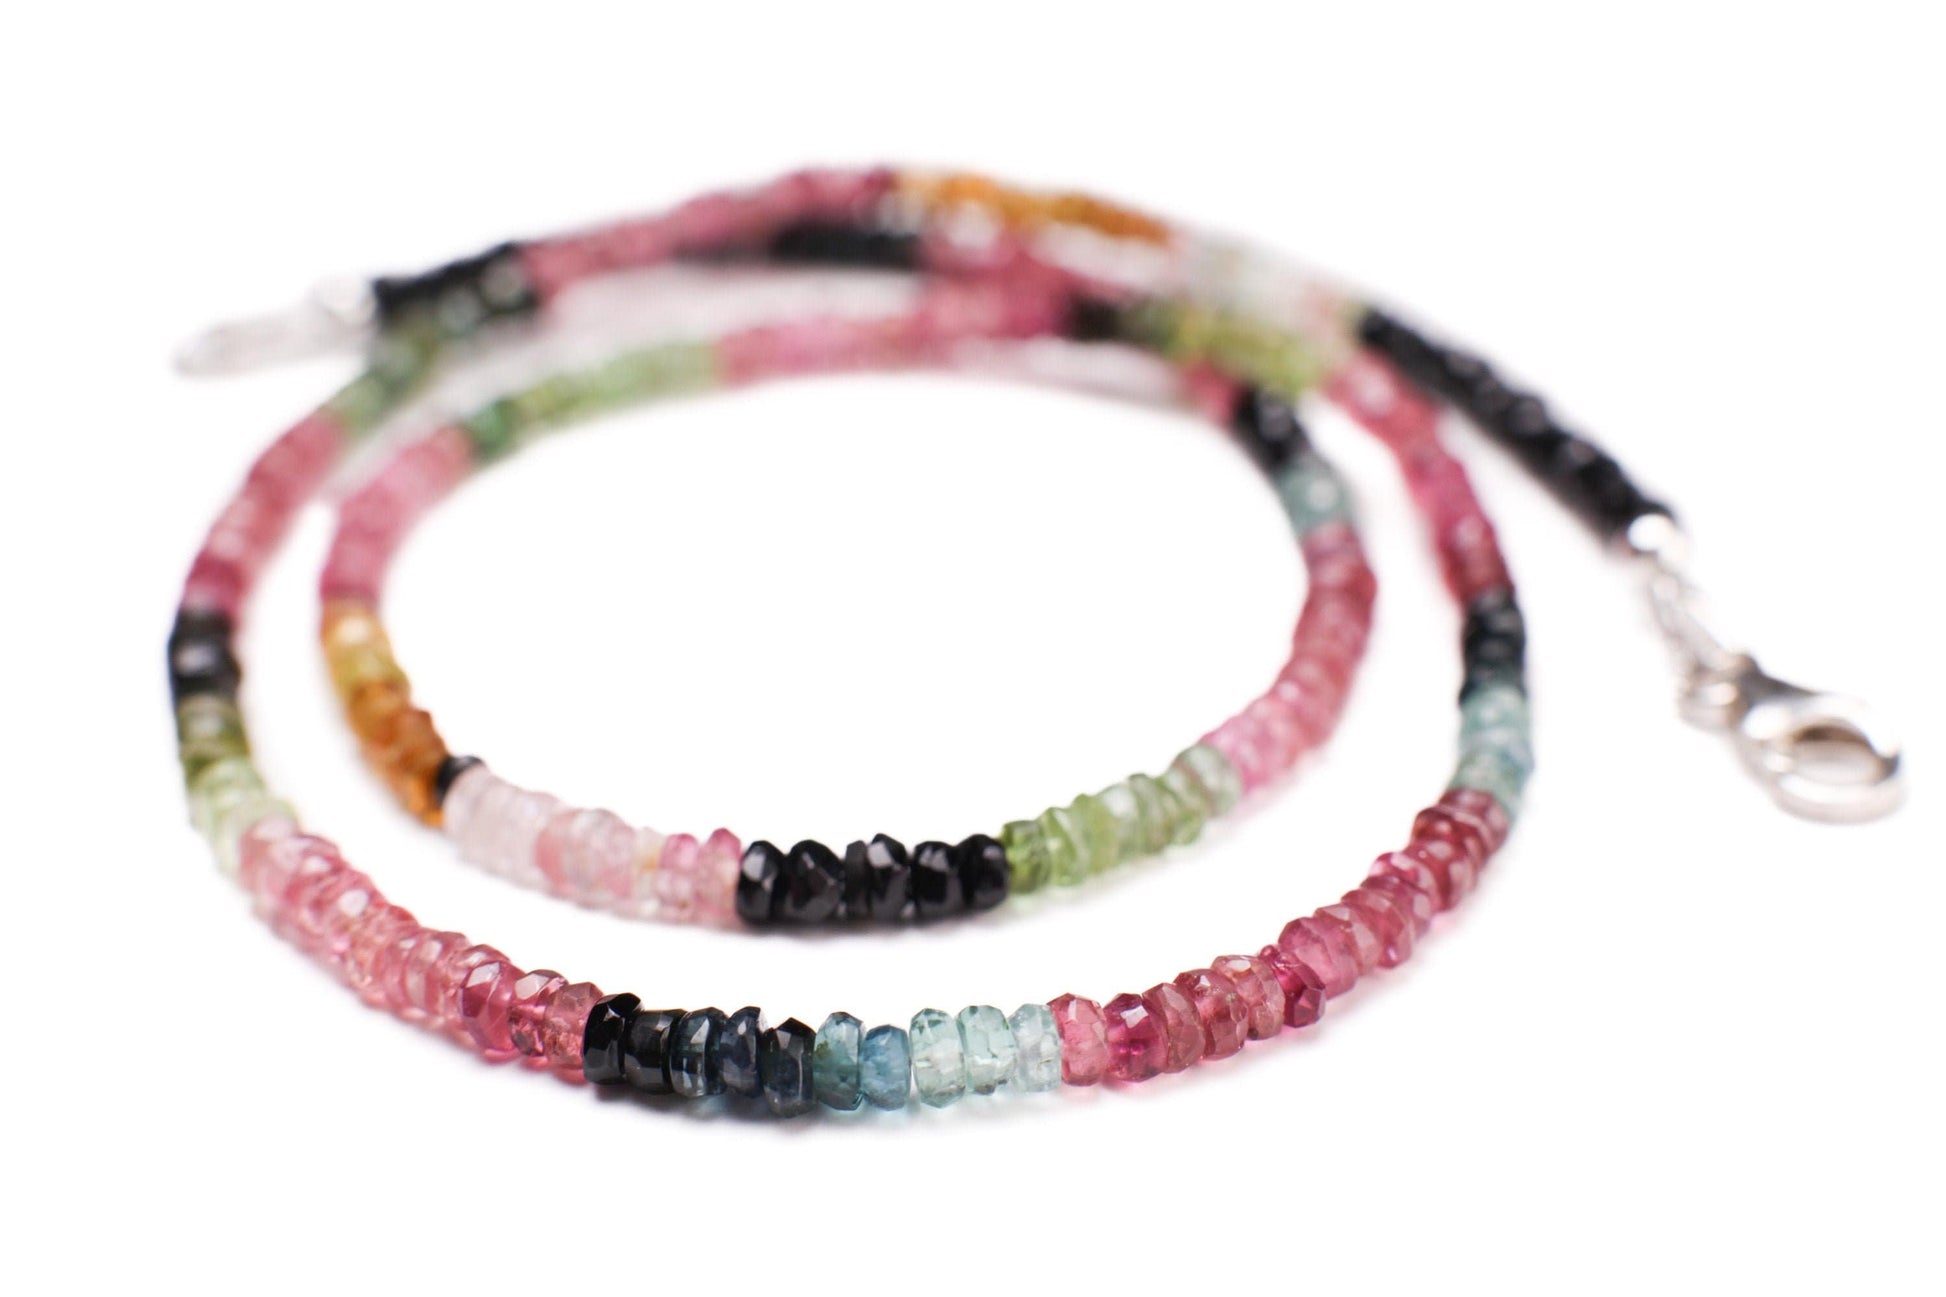 SALE--Natural Multi Watermelon Tourmaline 4mm Faceted AAA Rondelle Necklace & Bracelet 925 Sterling Silver,14k GF Clasp, Healing, Energy,